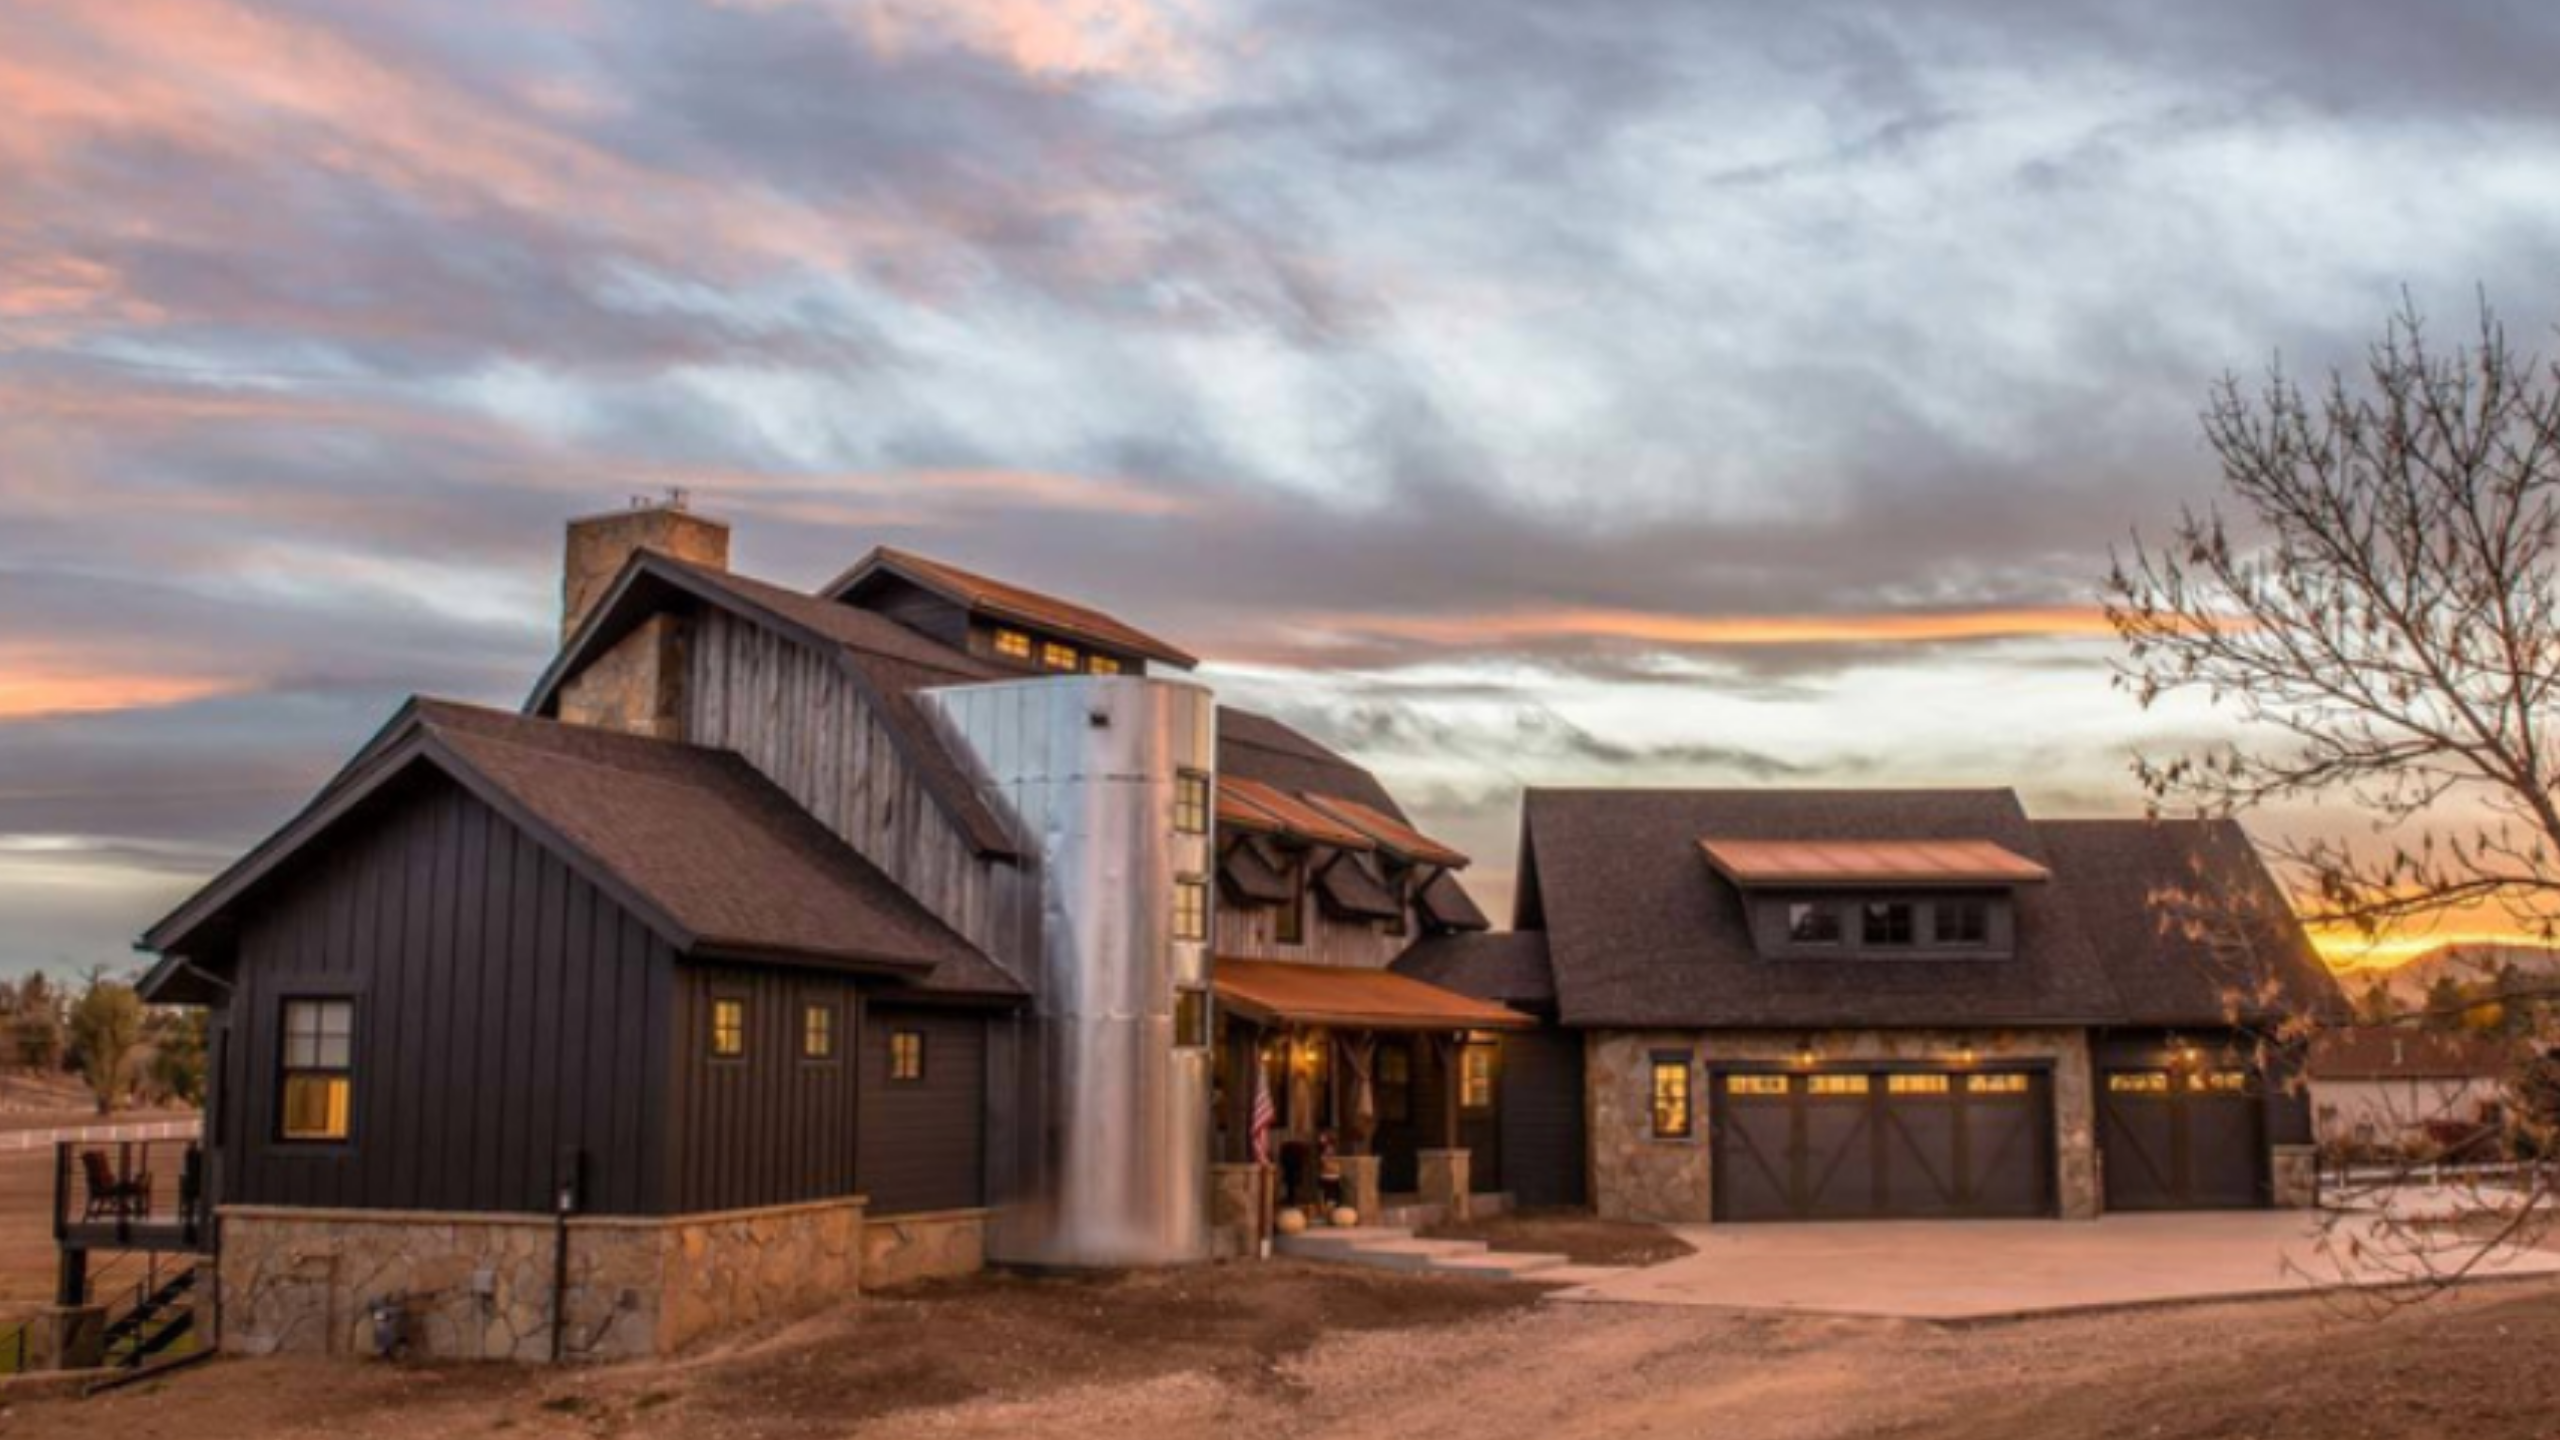 Trendy Barndominiums Why Millennials Are Raving About These Barn Style Homes